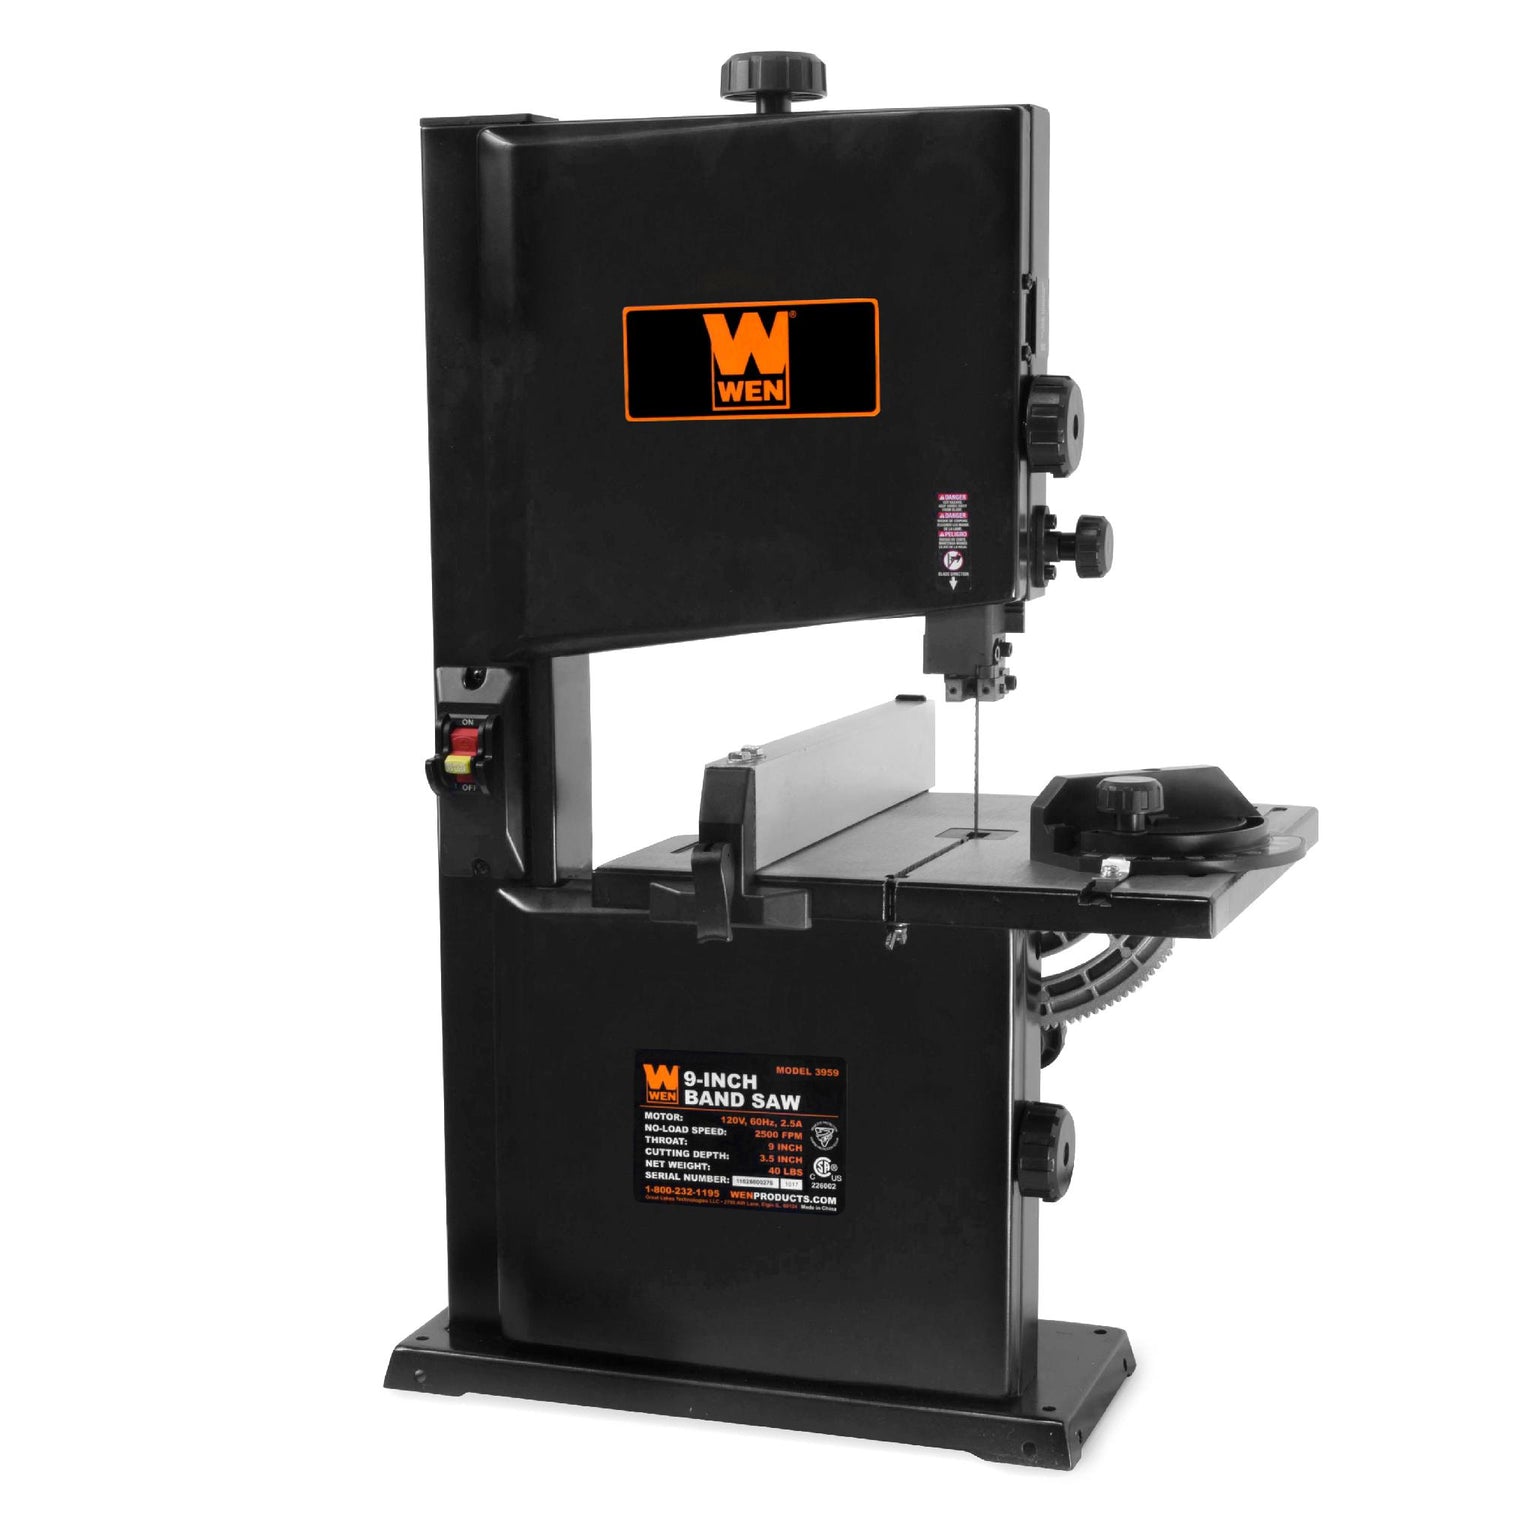 Shop Wen Woodworking Bandsaws — Wen Products 